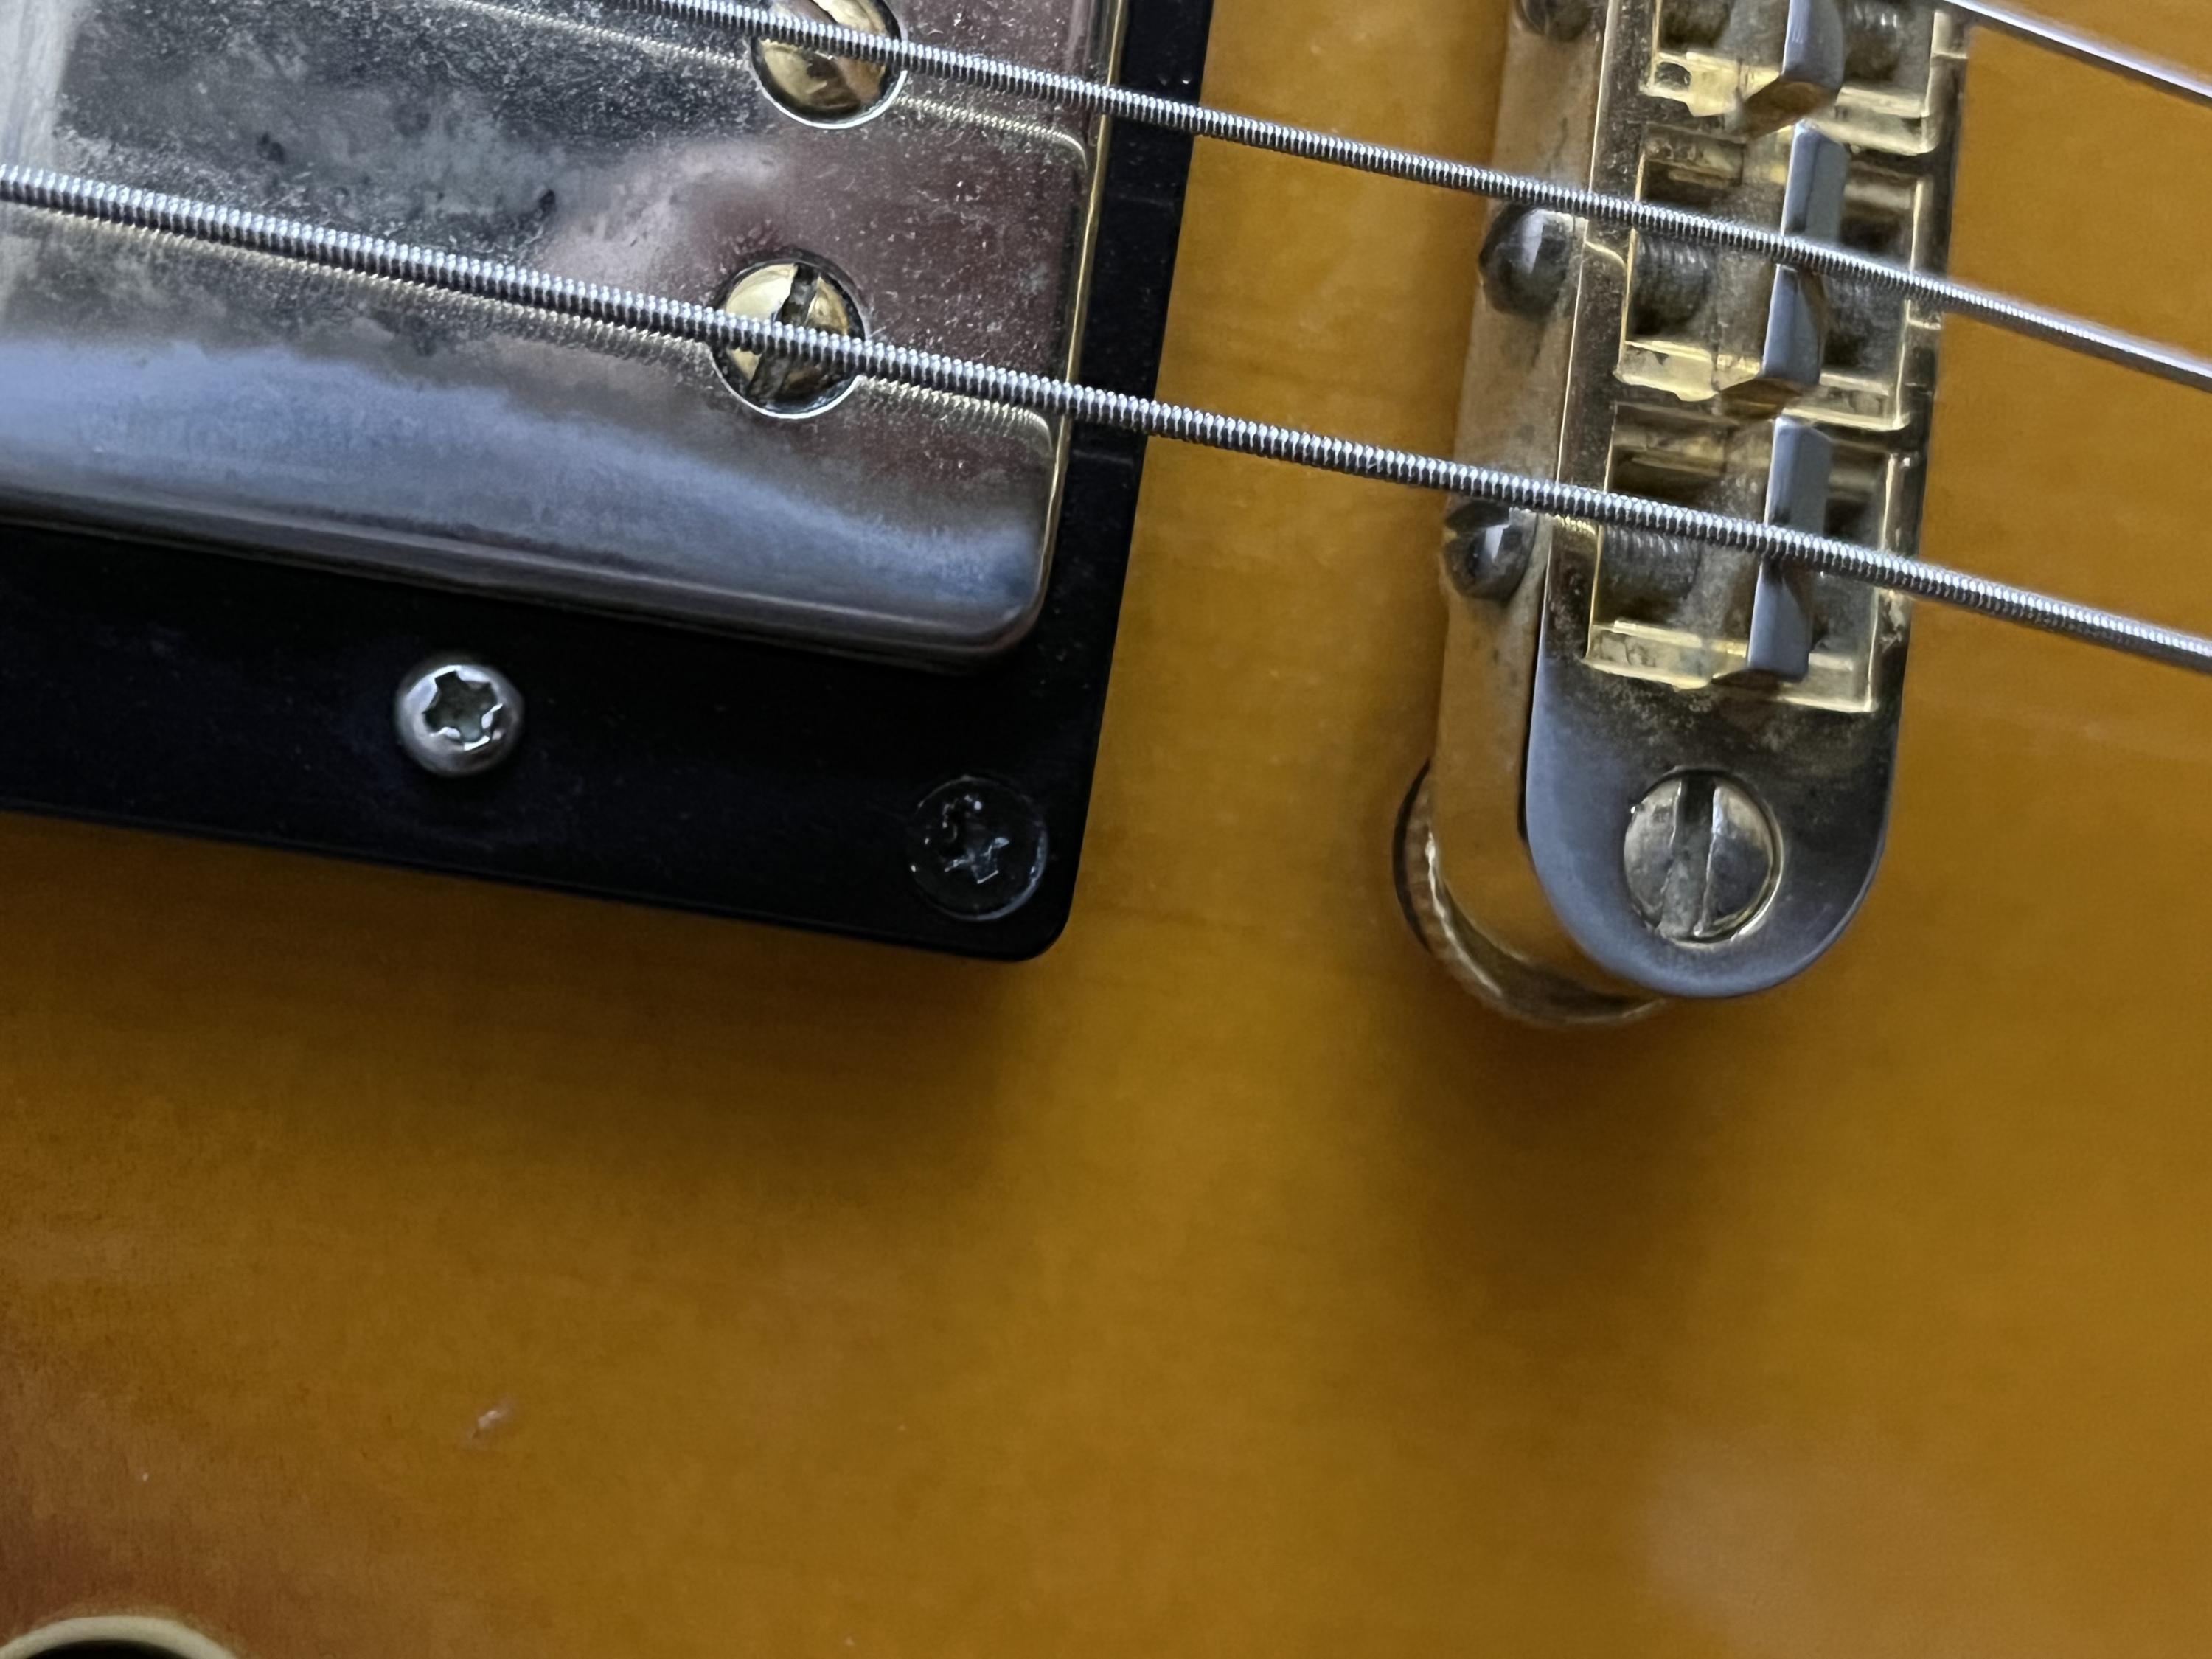 Alternate Picking - Difficulty on archtop-image_67177985-jpg